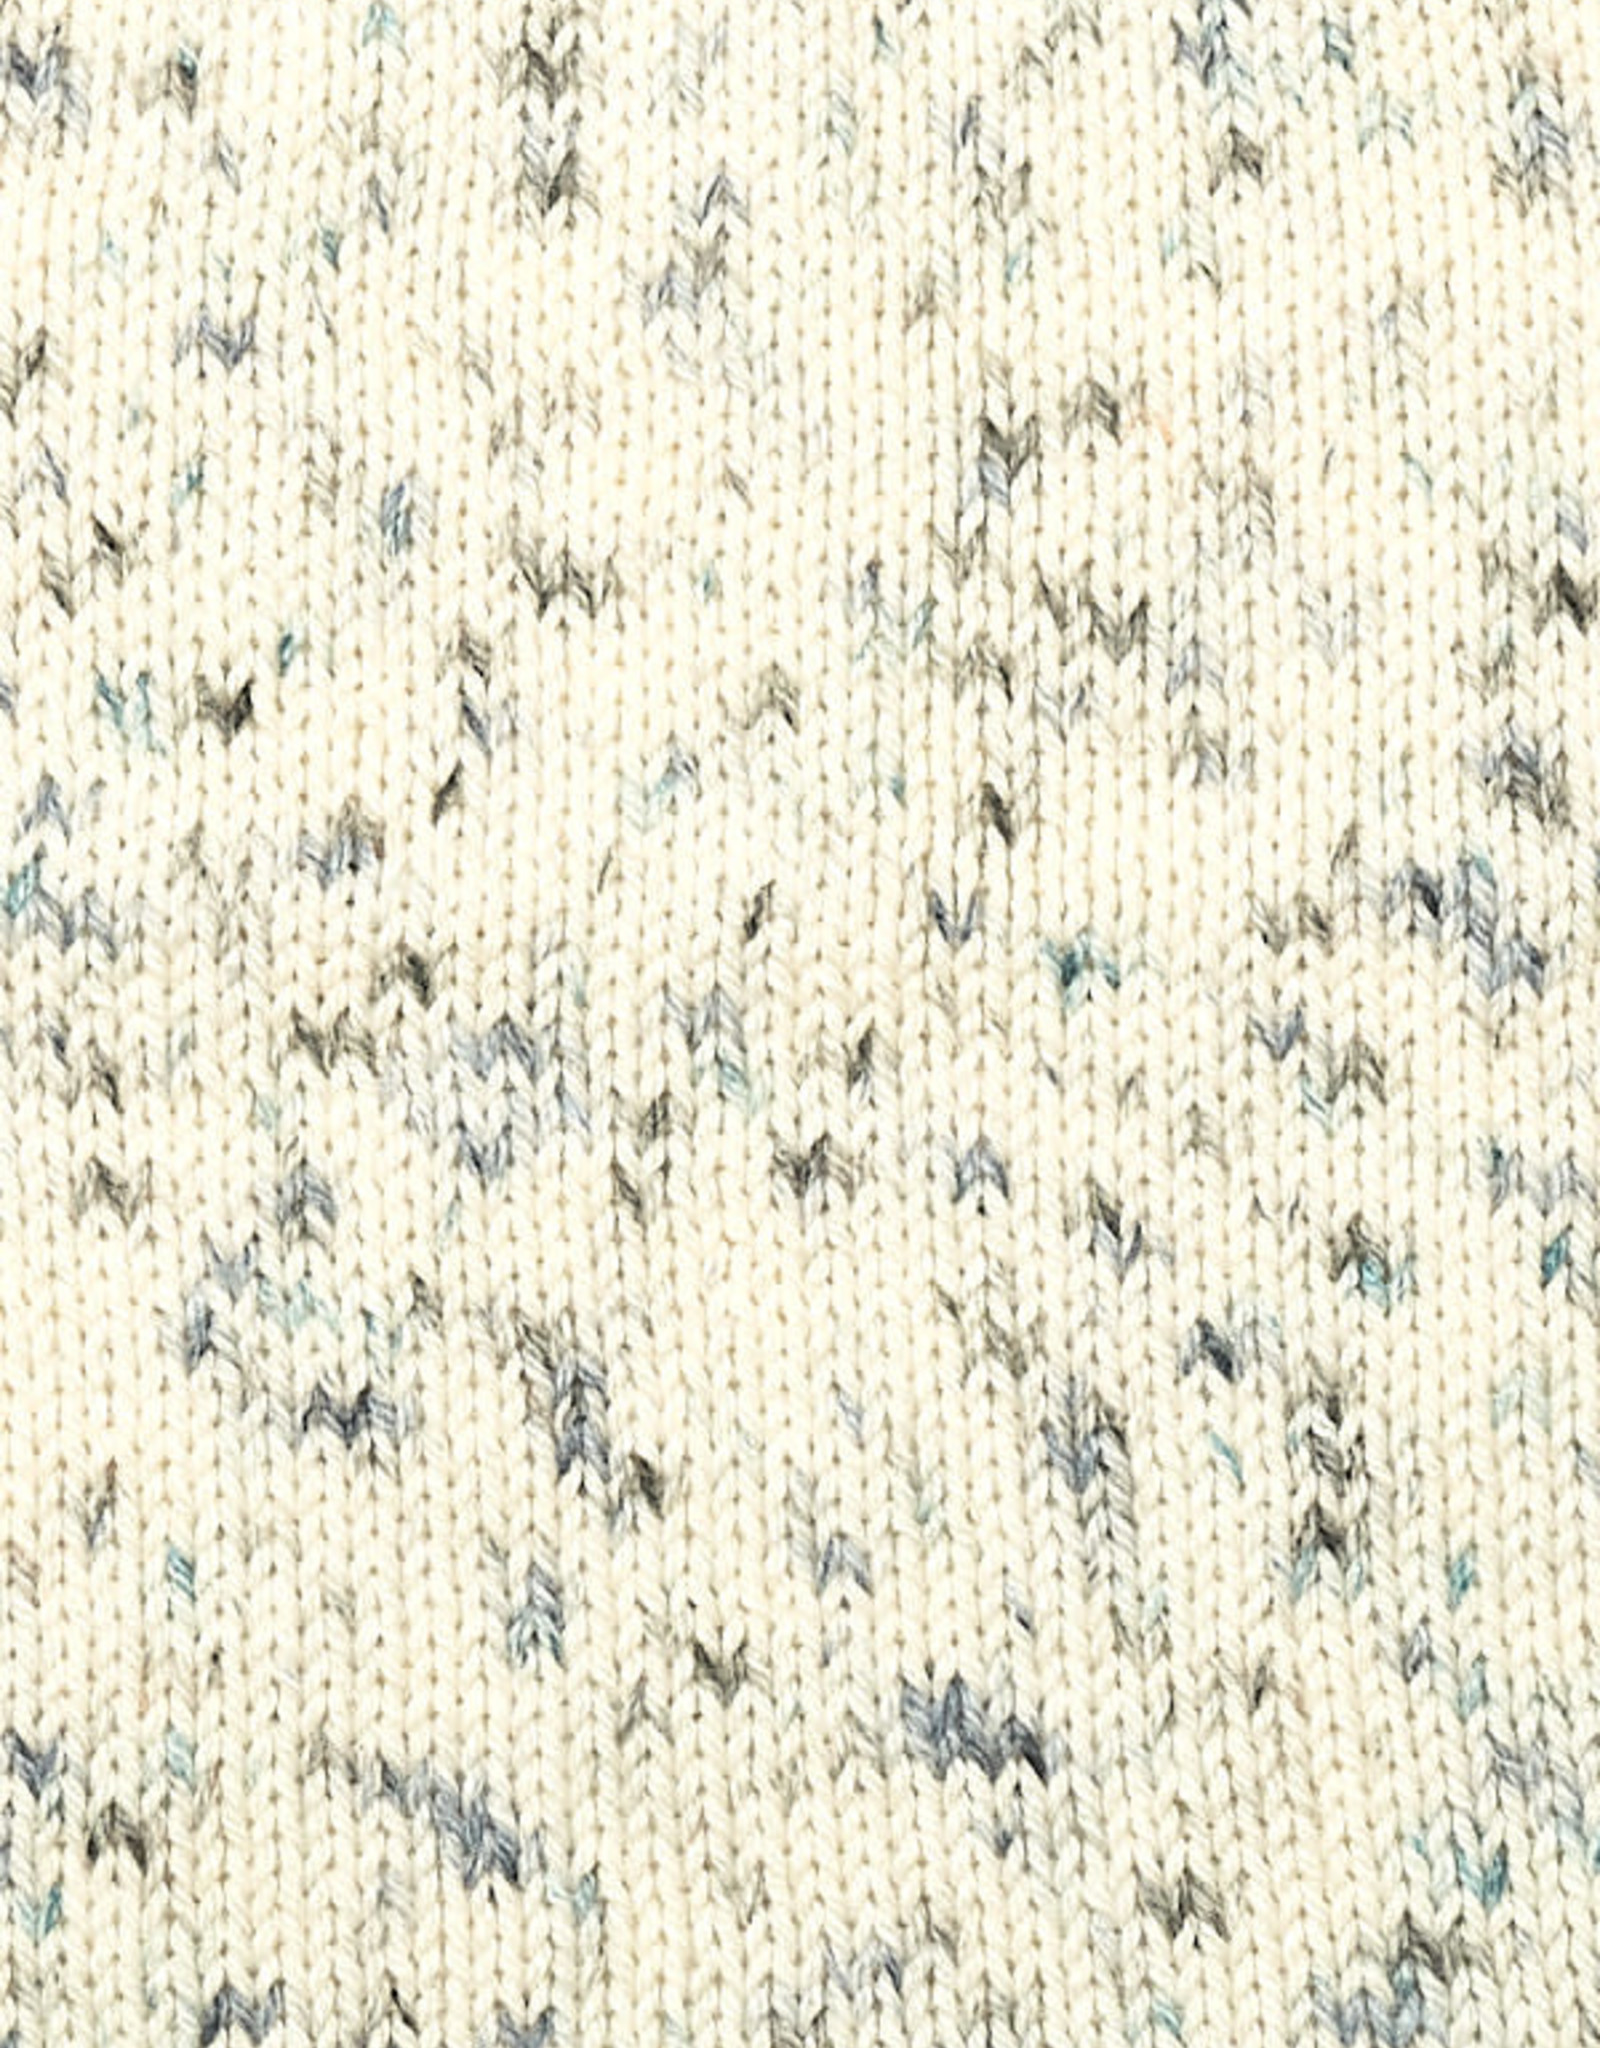 Vintage Baby Handpaint 10193 mint chocolate chip - The Blue Purl - Yarn ...